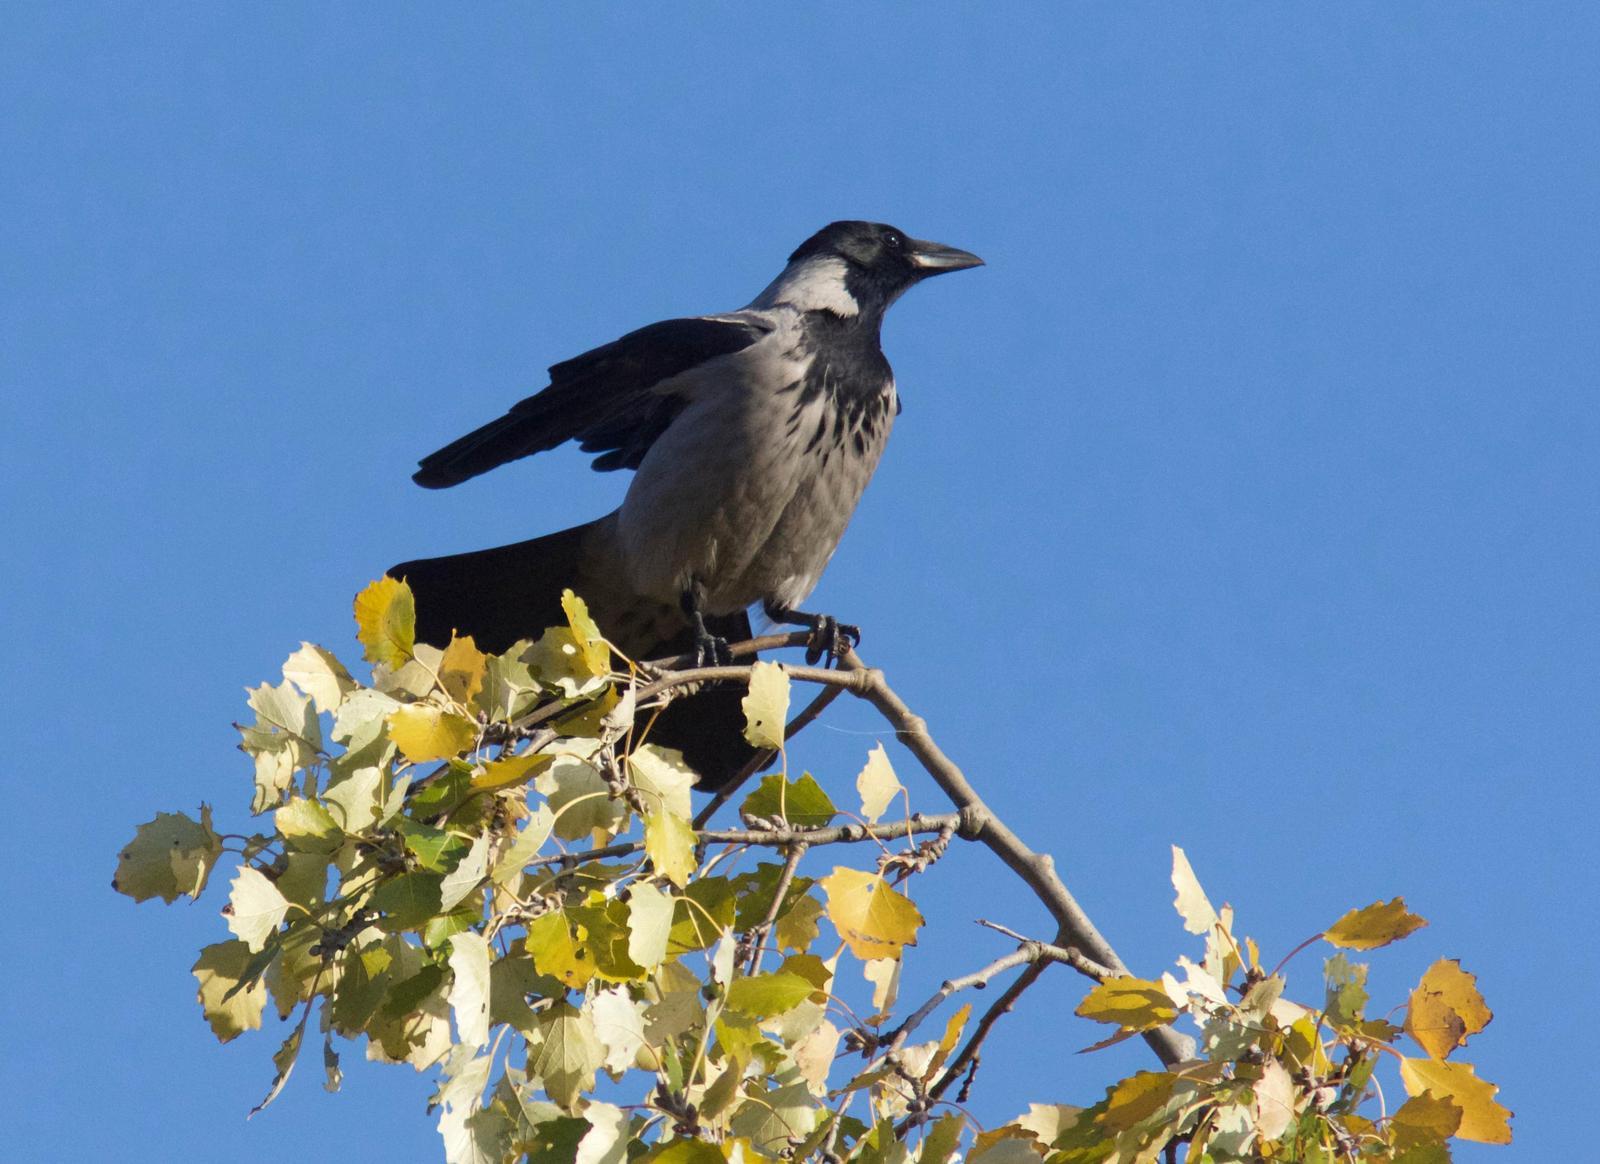 Hooded Crow Photo by Emily Willoughby